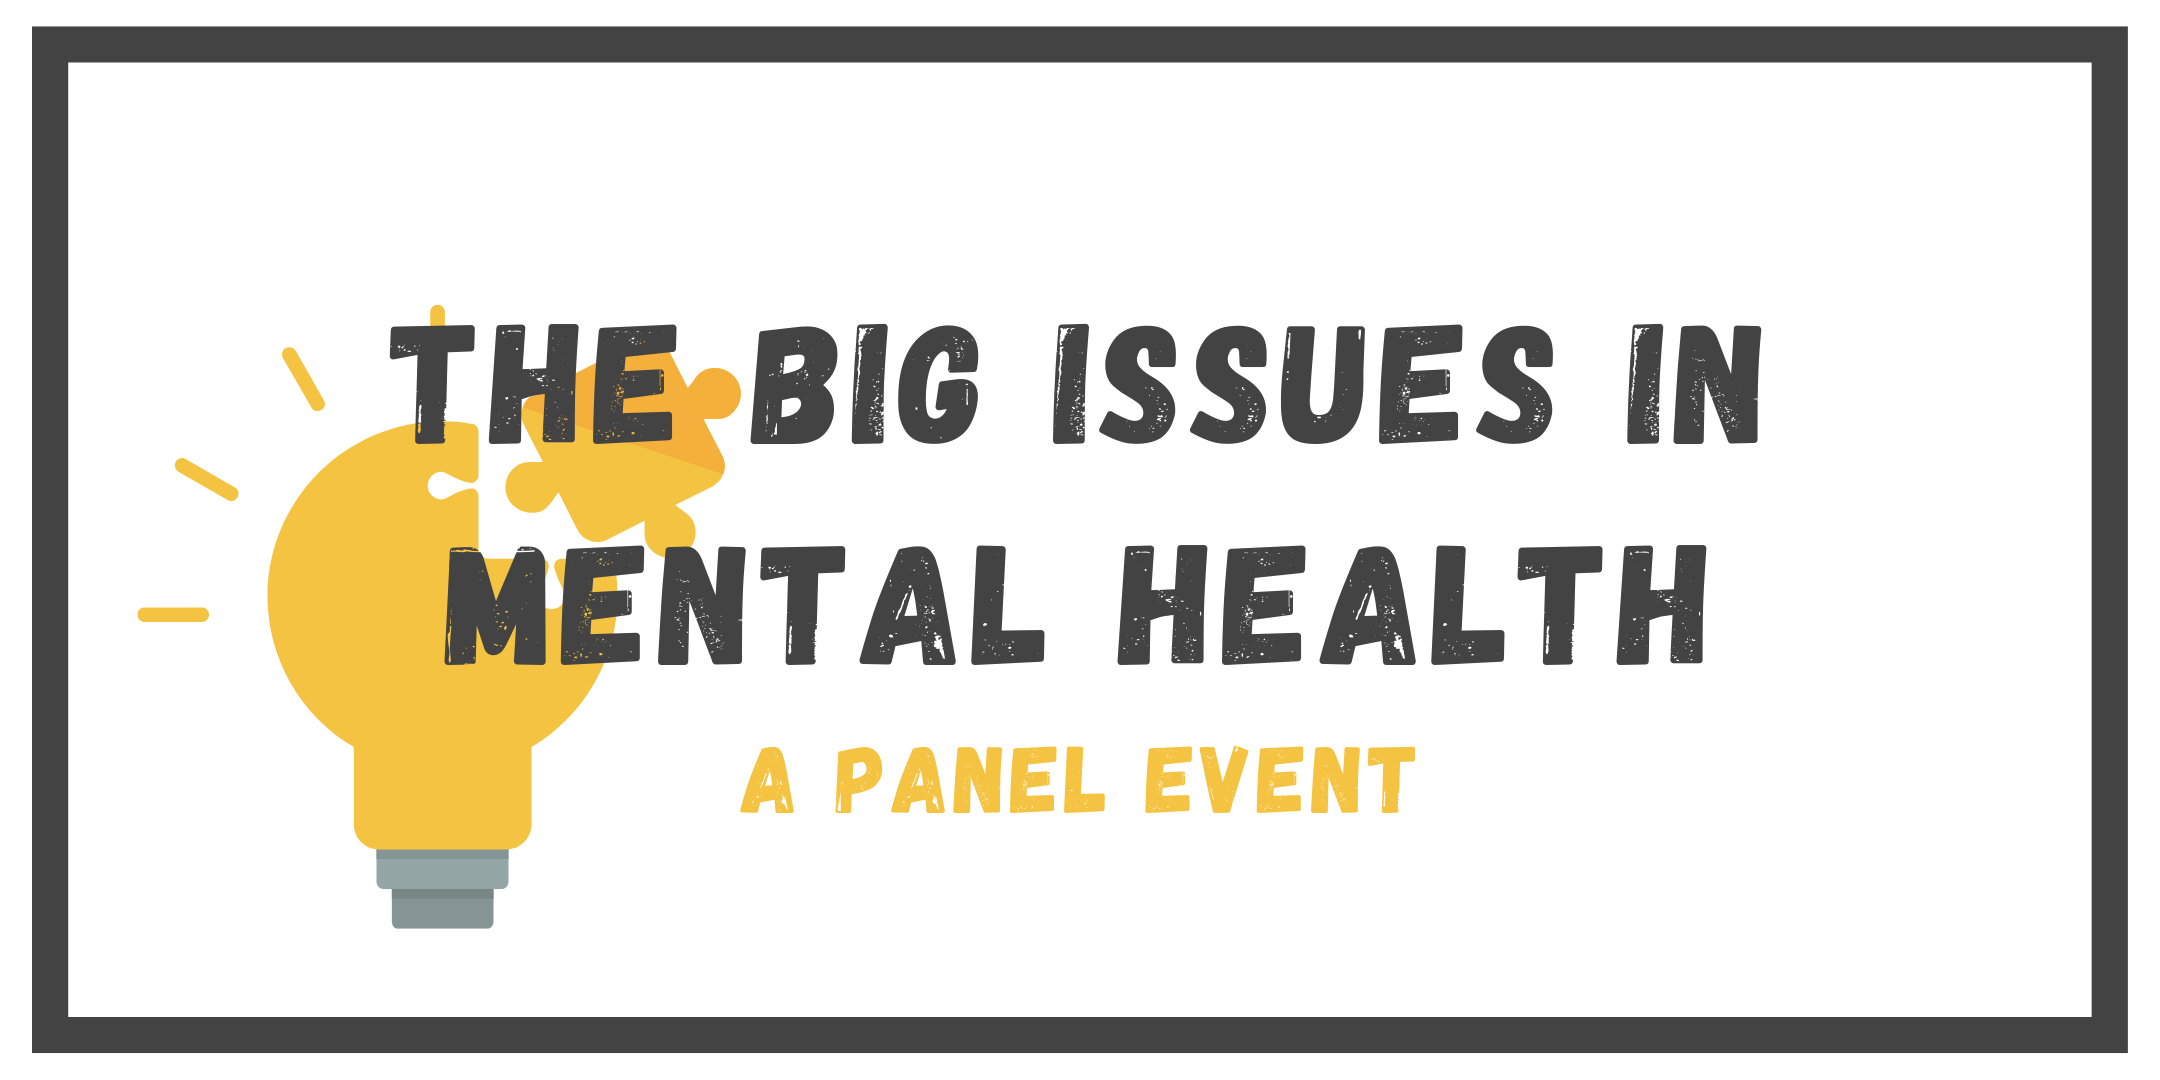 The Big Issues in Mental Health: a panel event